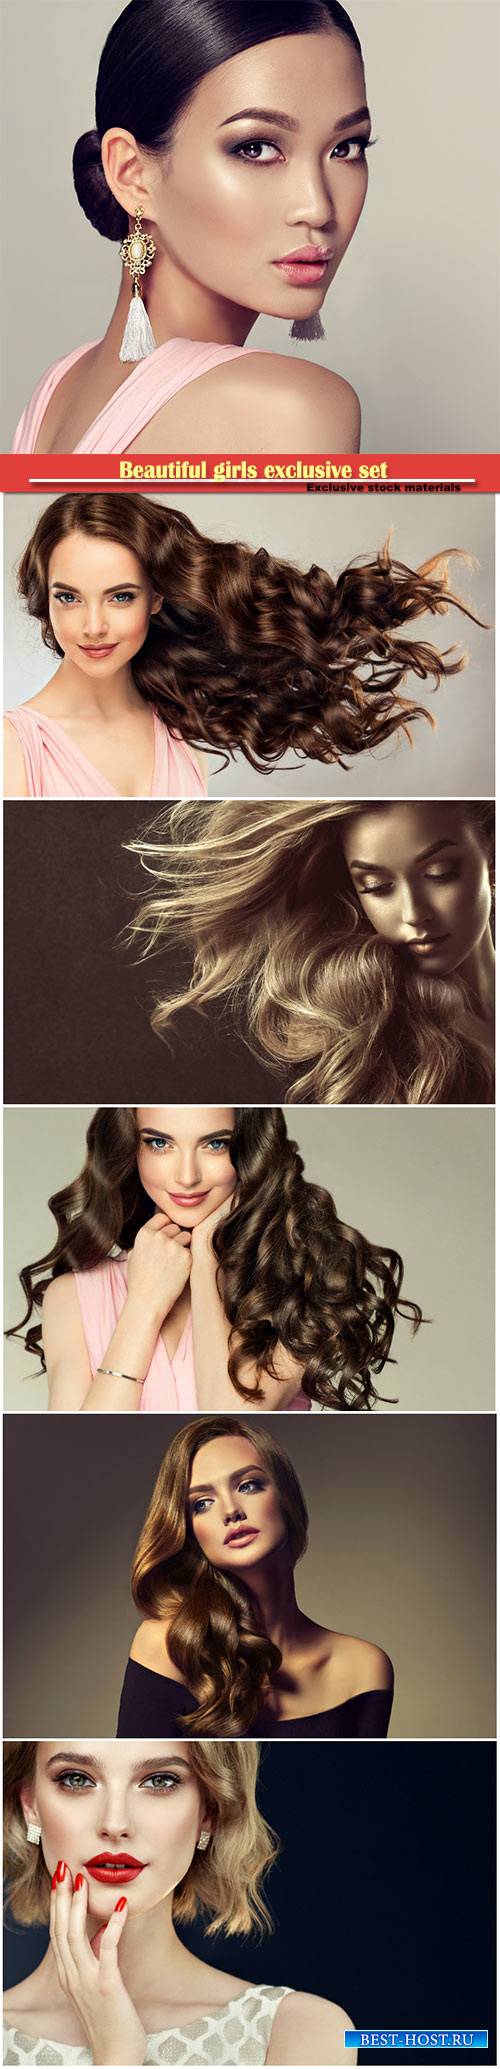 Fashion girls with makeup and beautiful hair